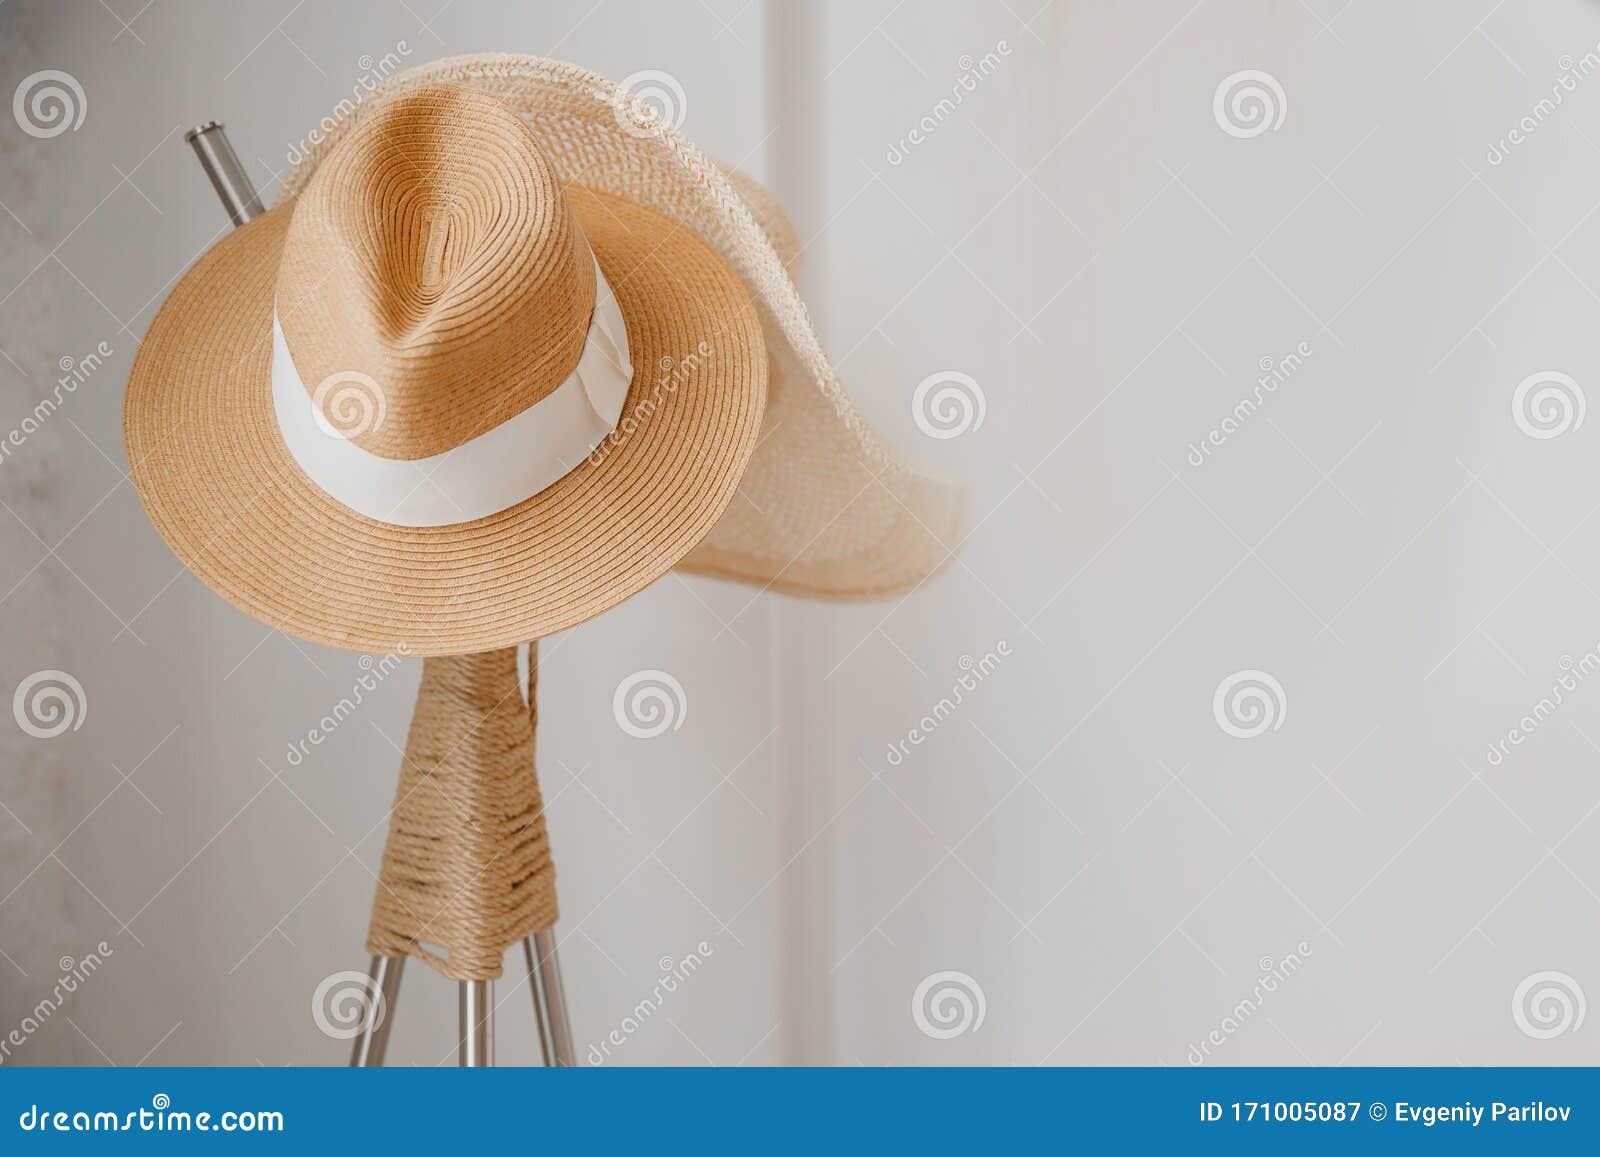 Straw Yellow Hat Hanging a White Wooden Coat Hanger, Scandinavian Style Minimalism. Travel Concept Stock Image - Image of modern, showroom: 171005087